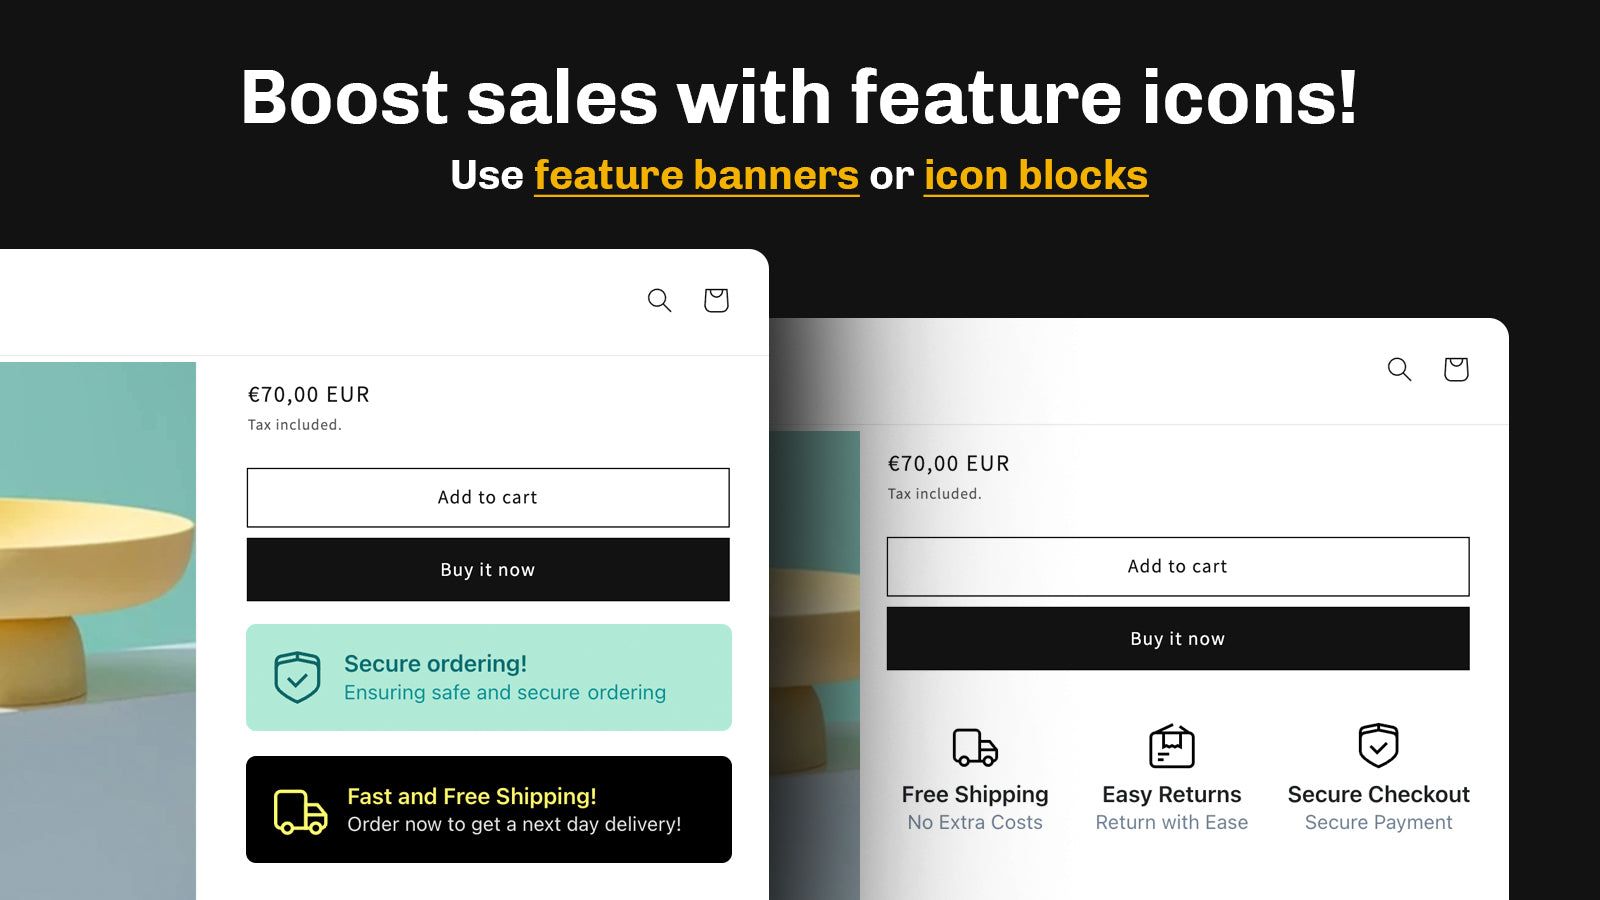 Boost Shopify sales with trust badges, feature icons and baners